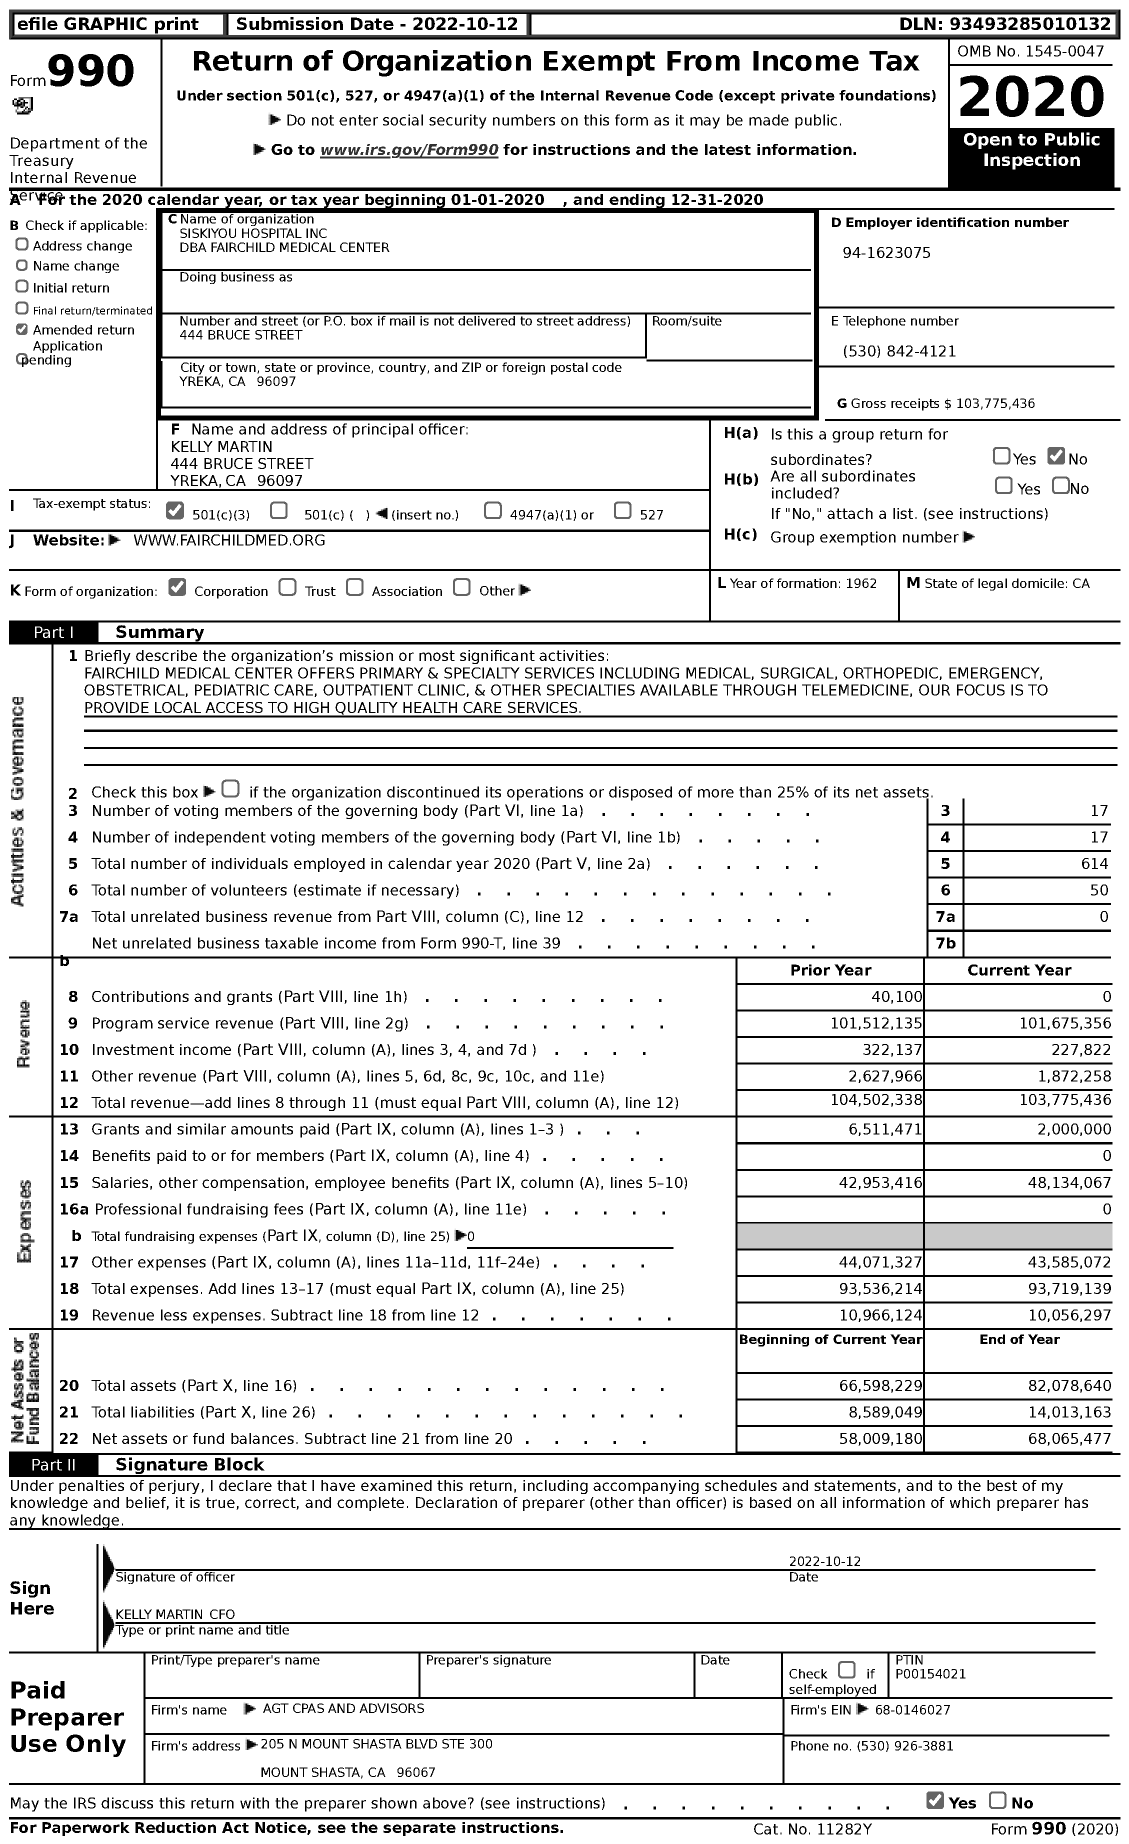 Image of first page of 2020 Form 990 for Fairchild Medical Center (FMC)